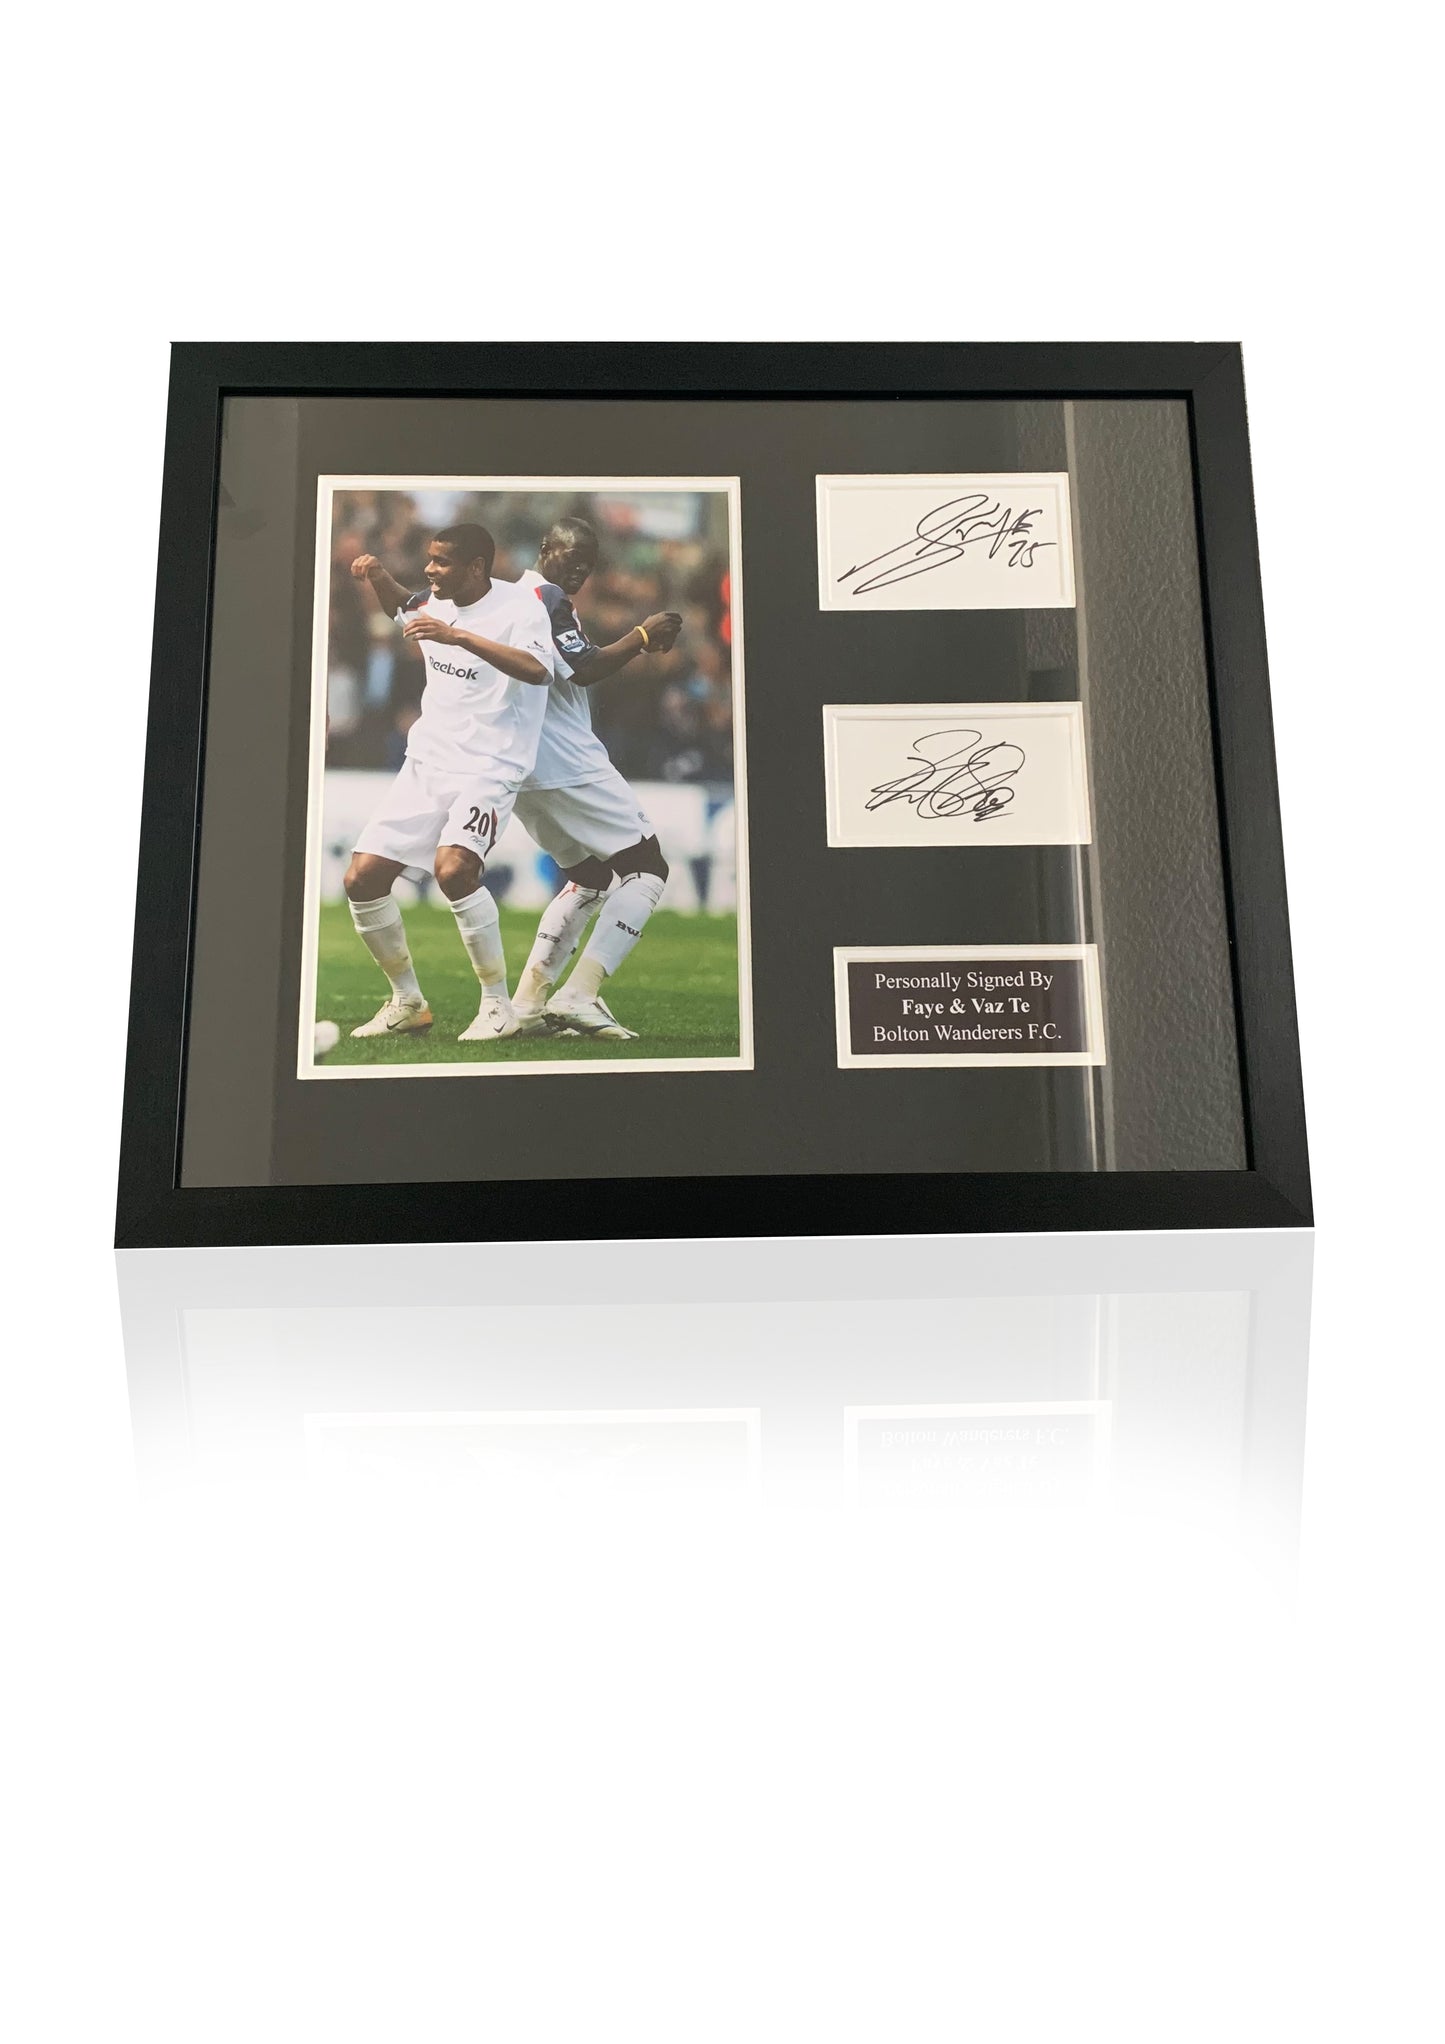 Faye & Vaz Te Bolton Wanderers signed framed photo card montage